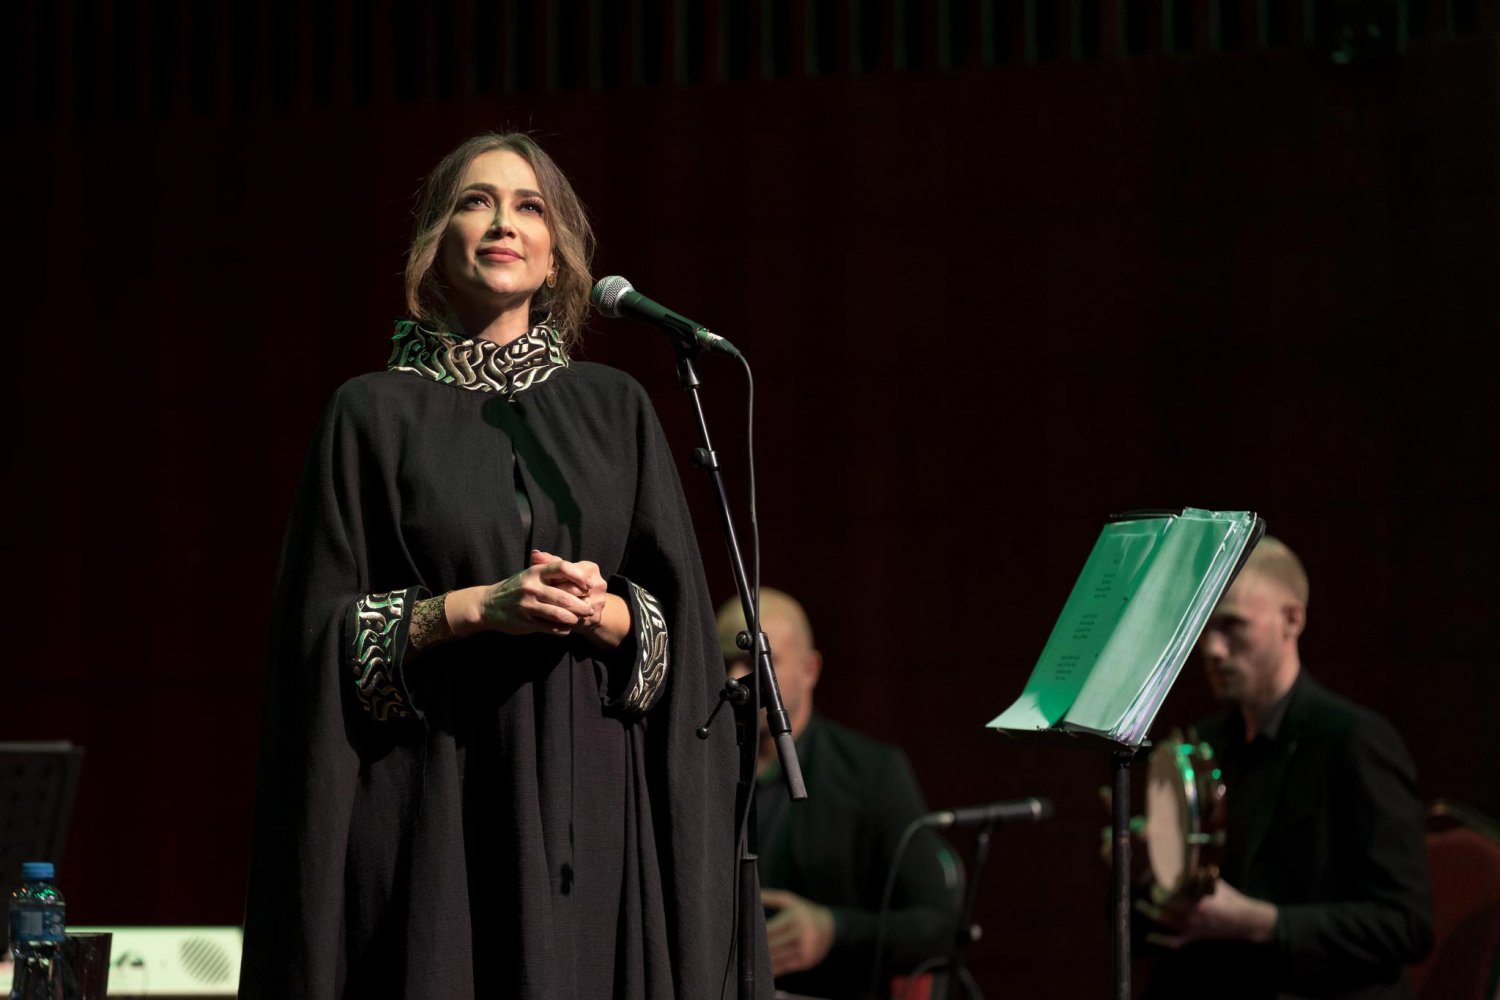 Dalal Abu Amneh performs at a music festival sponsored by Yabous Cultural Centre, Jerusalem, September 16, 2022.